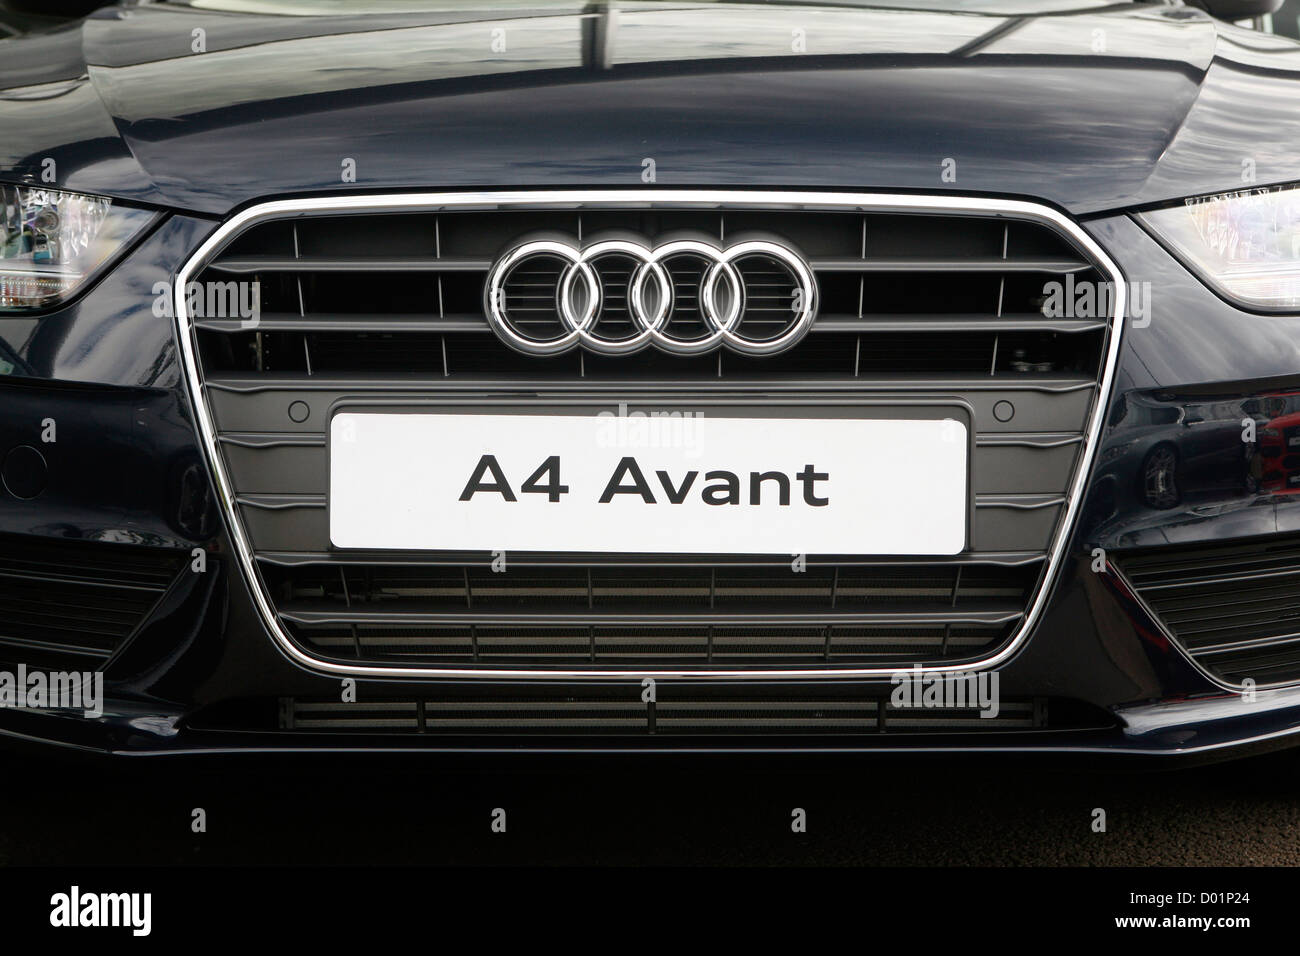 The view of the front of a modern Audi for sale at a car dealership. Stock Photo